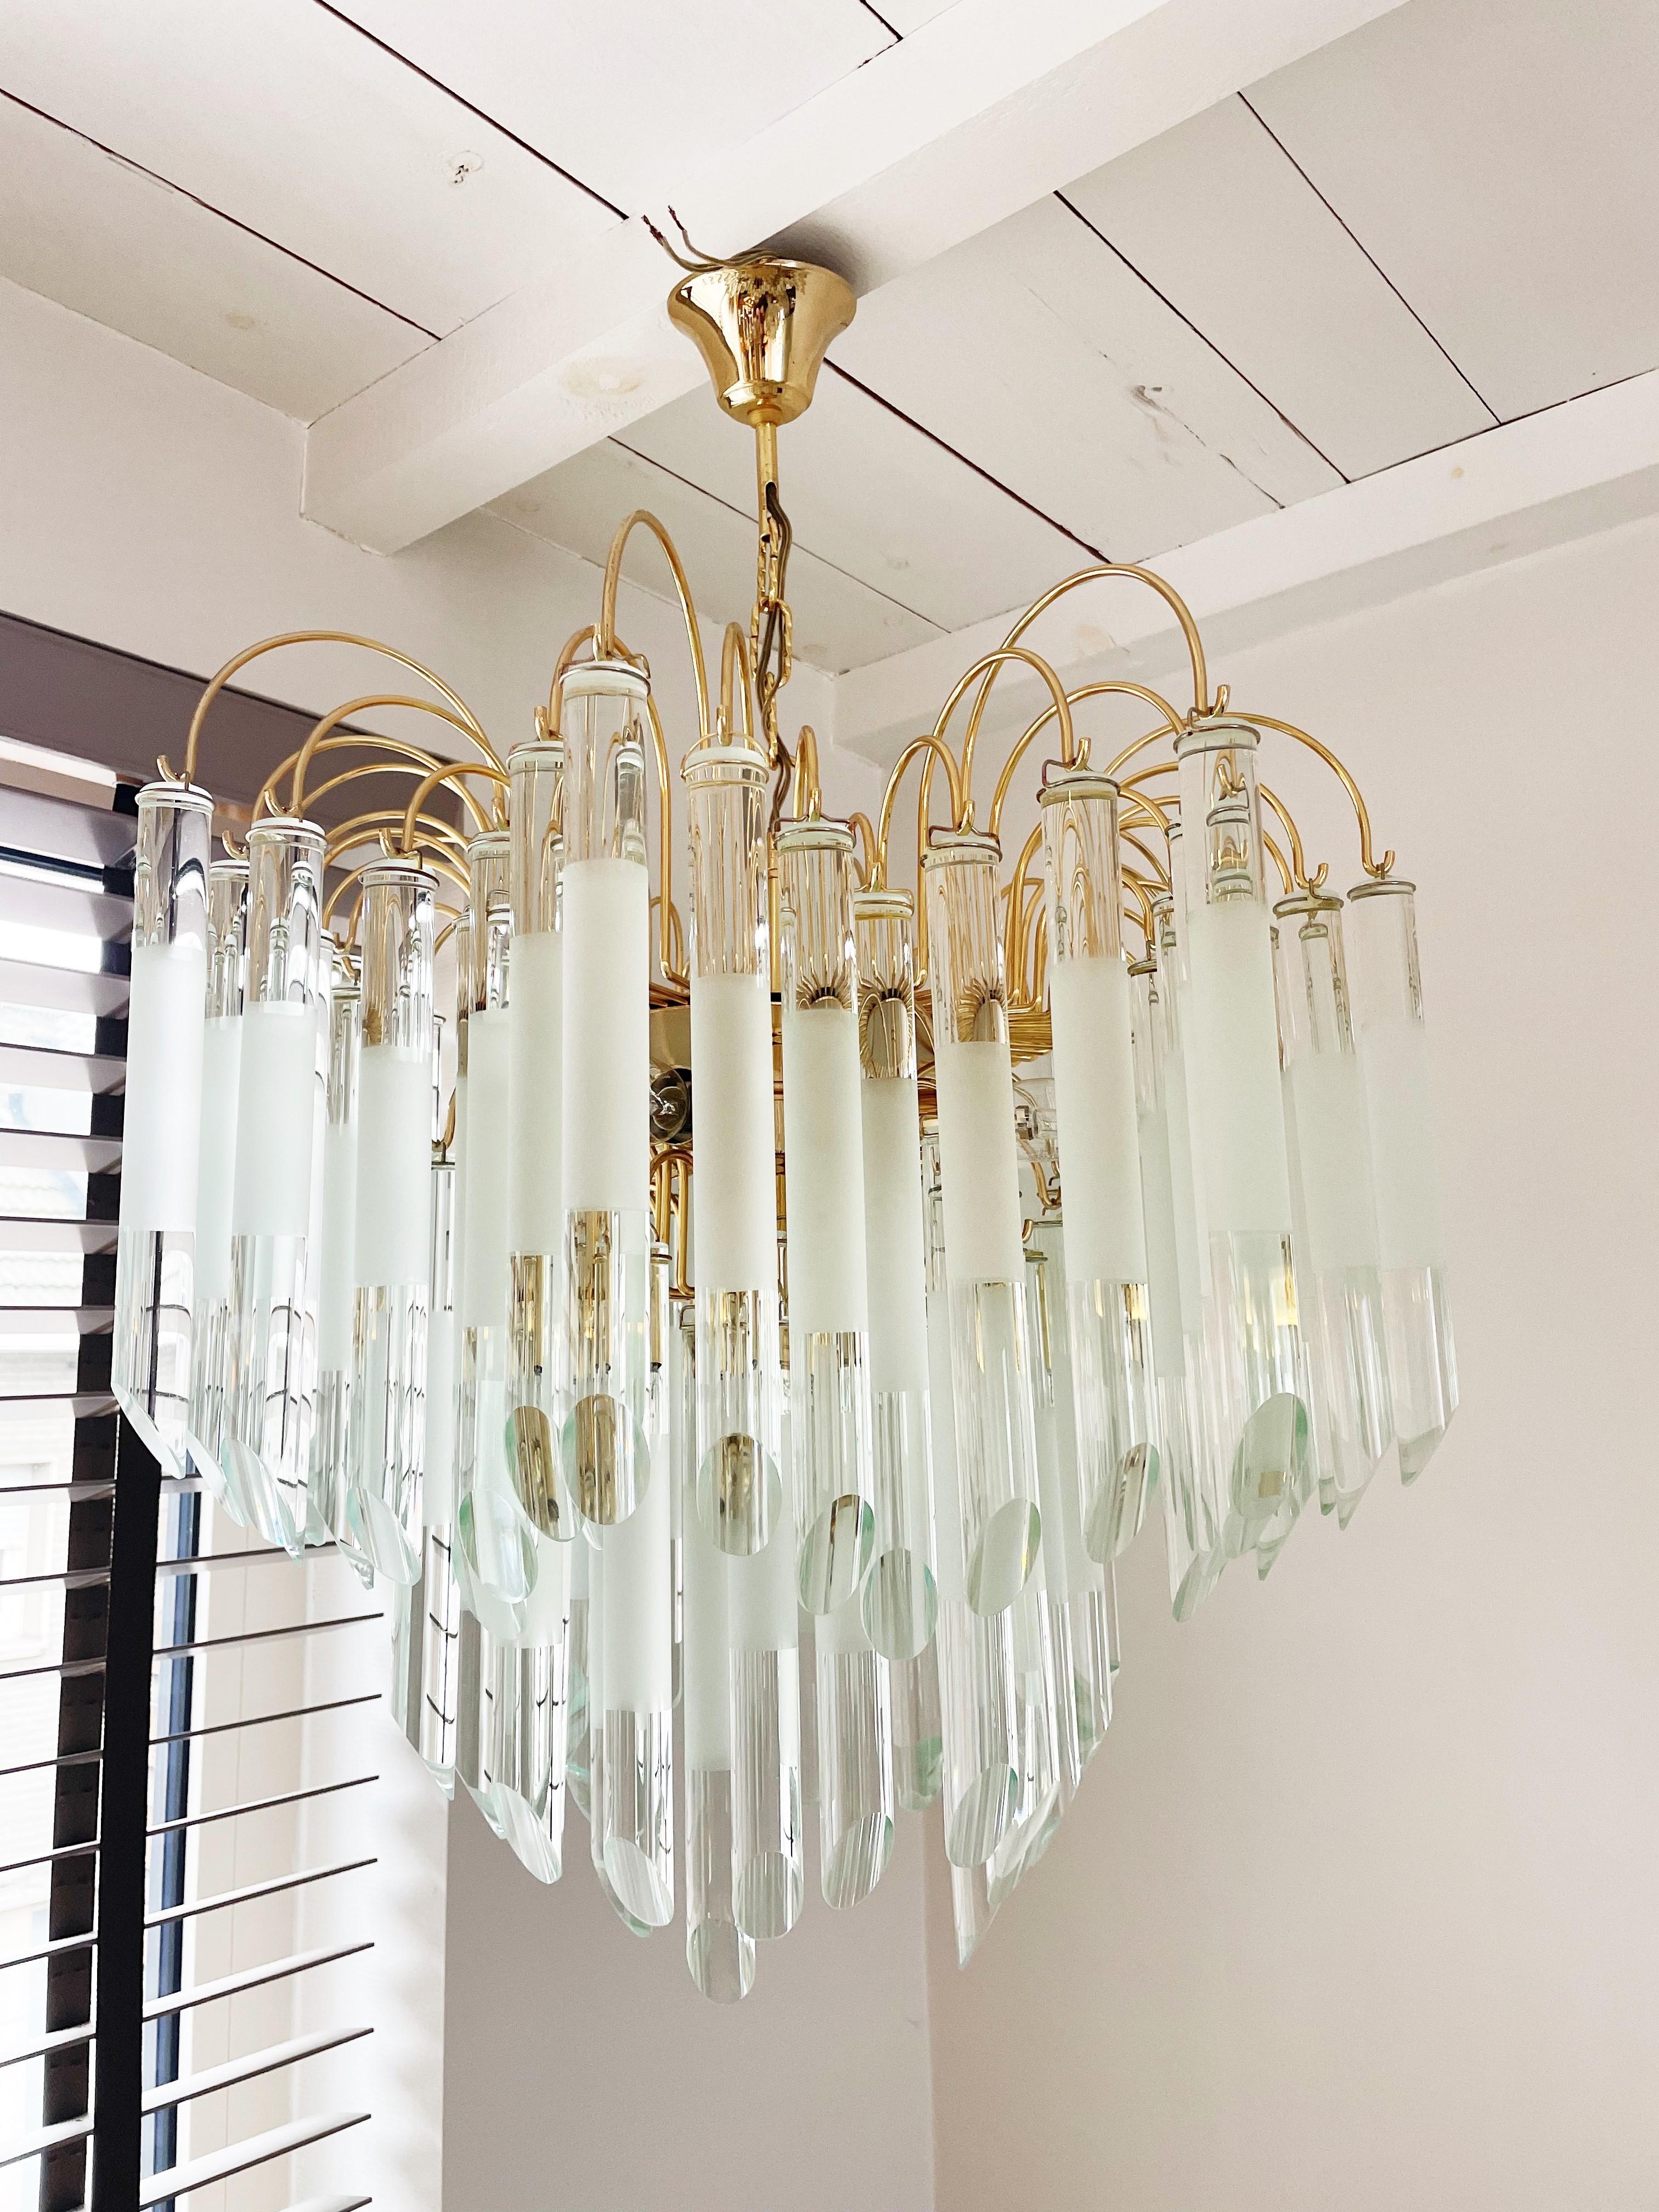 Vintage Glass Chandelier in the Manner of Paolo Venini, 1970s For Sale 4